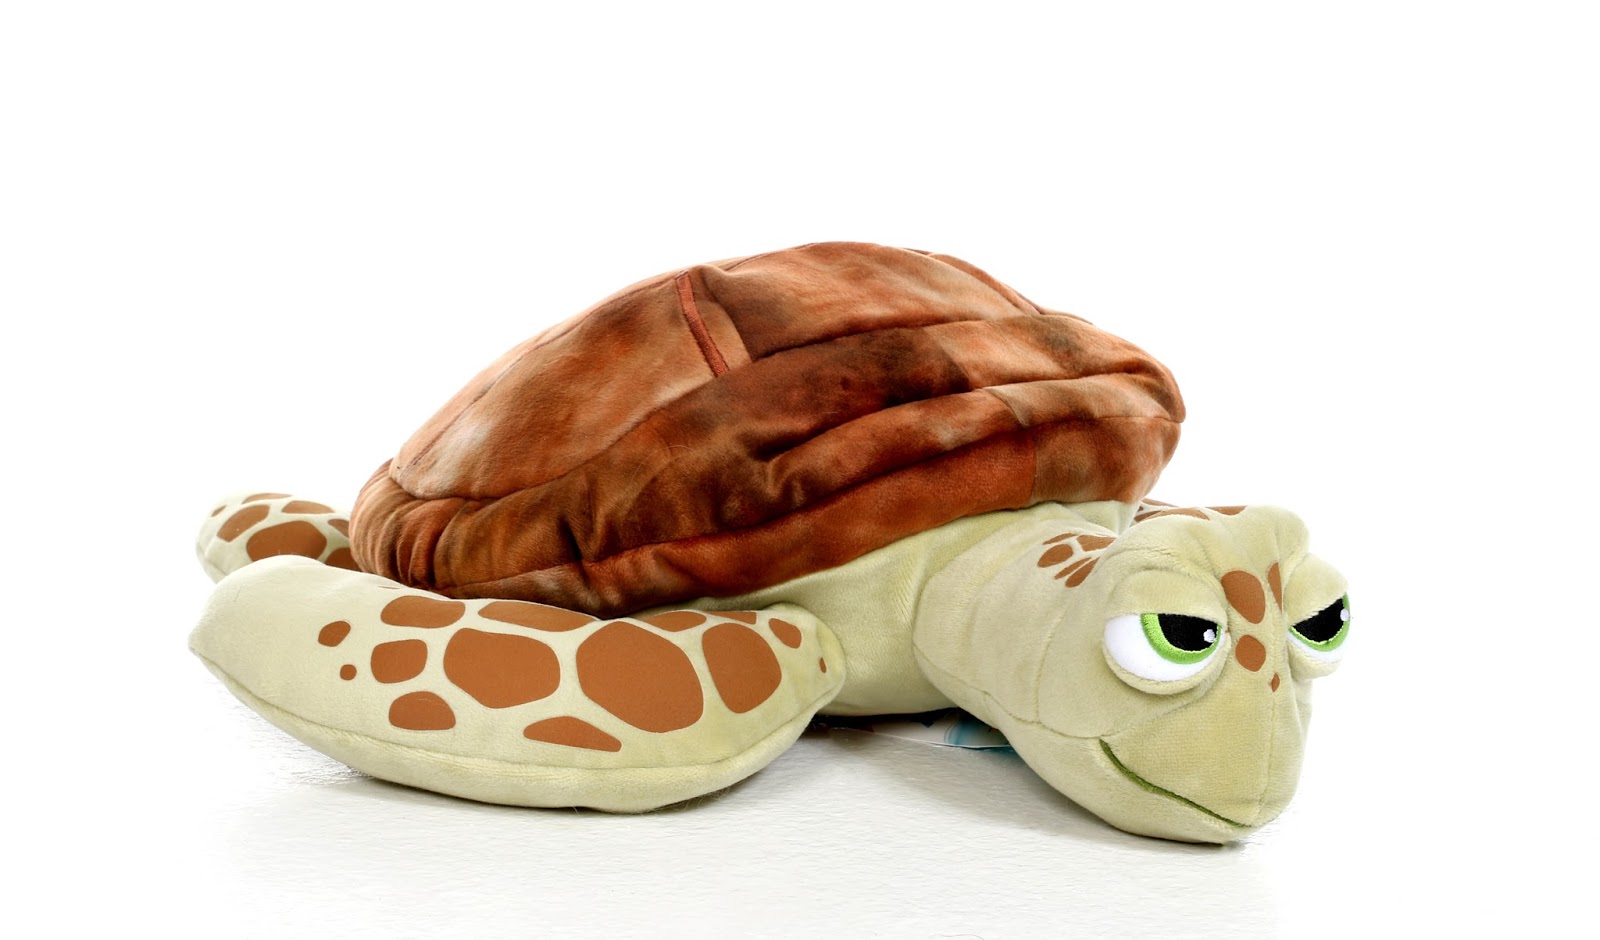 finding nemo turtle toy